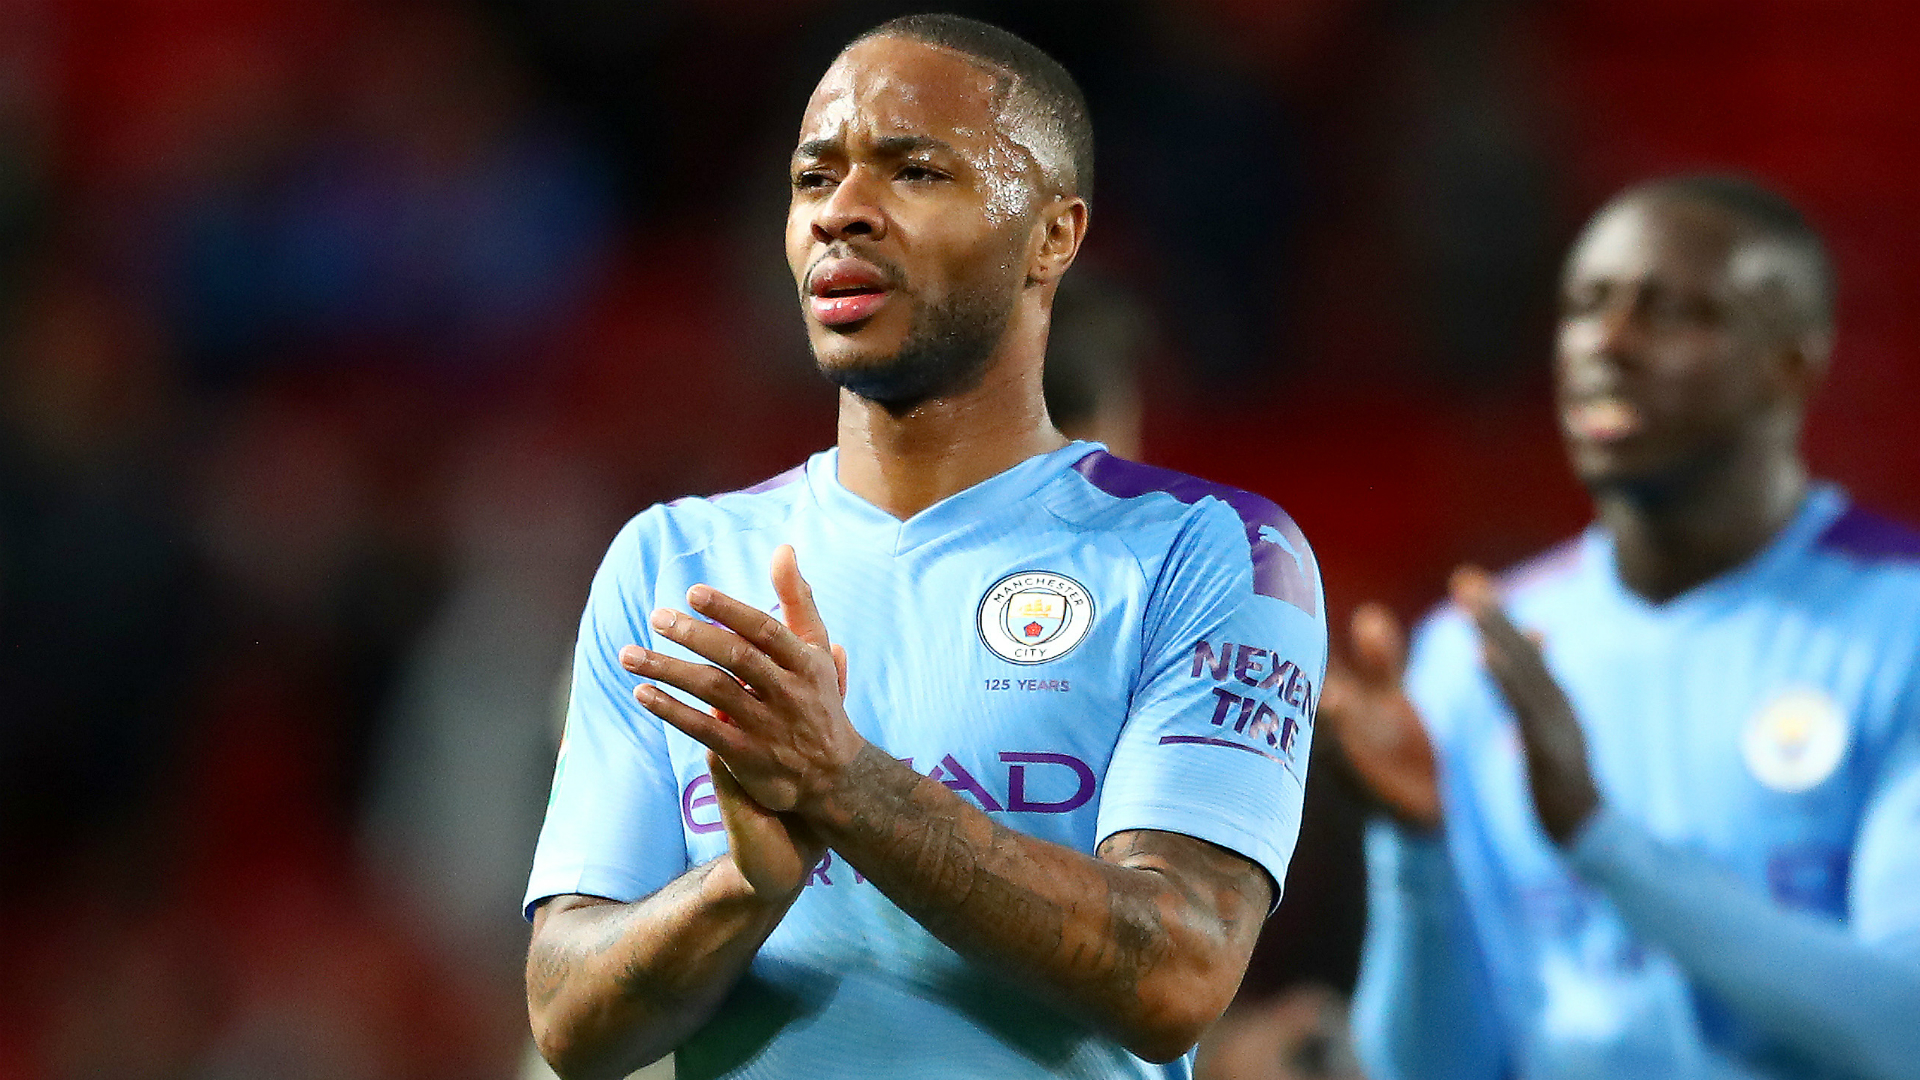 Despite insisting he is happy at Manchester City, Raheem Sterling did not hide his admiration for Real Madrid.